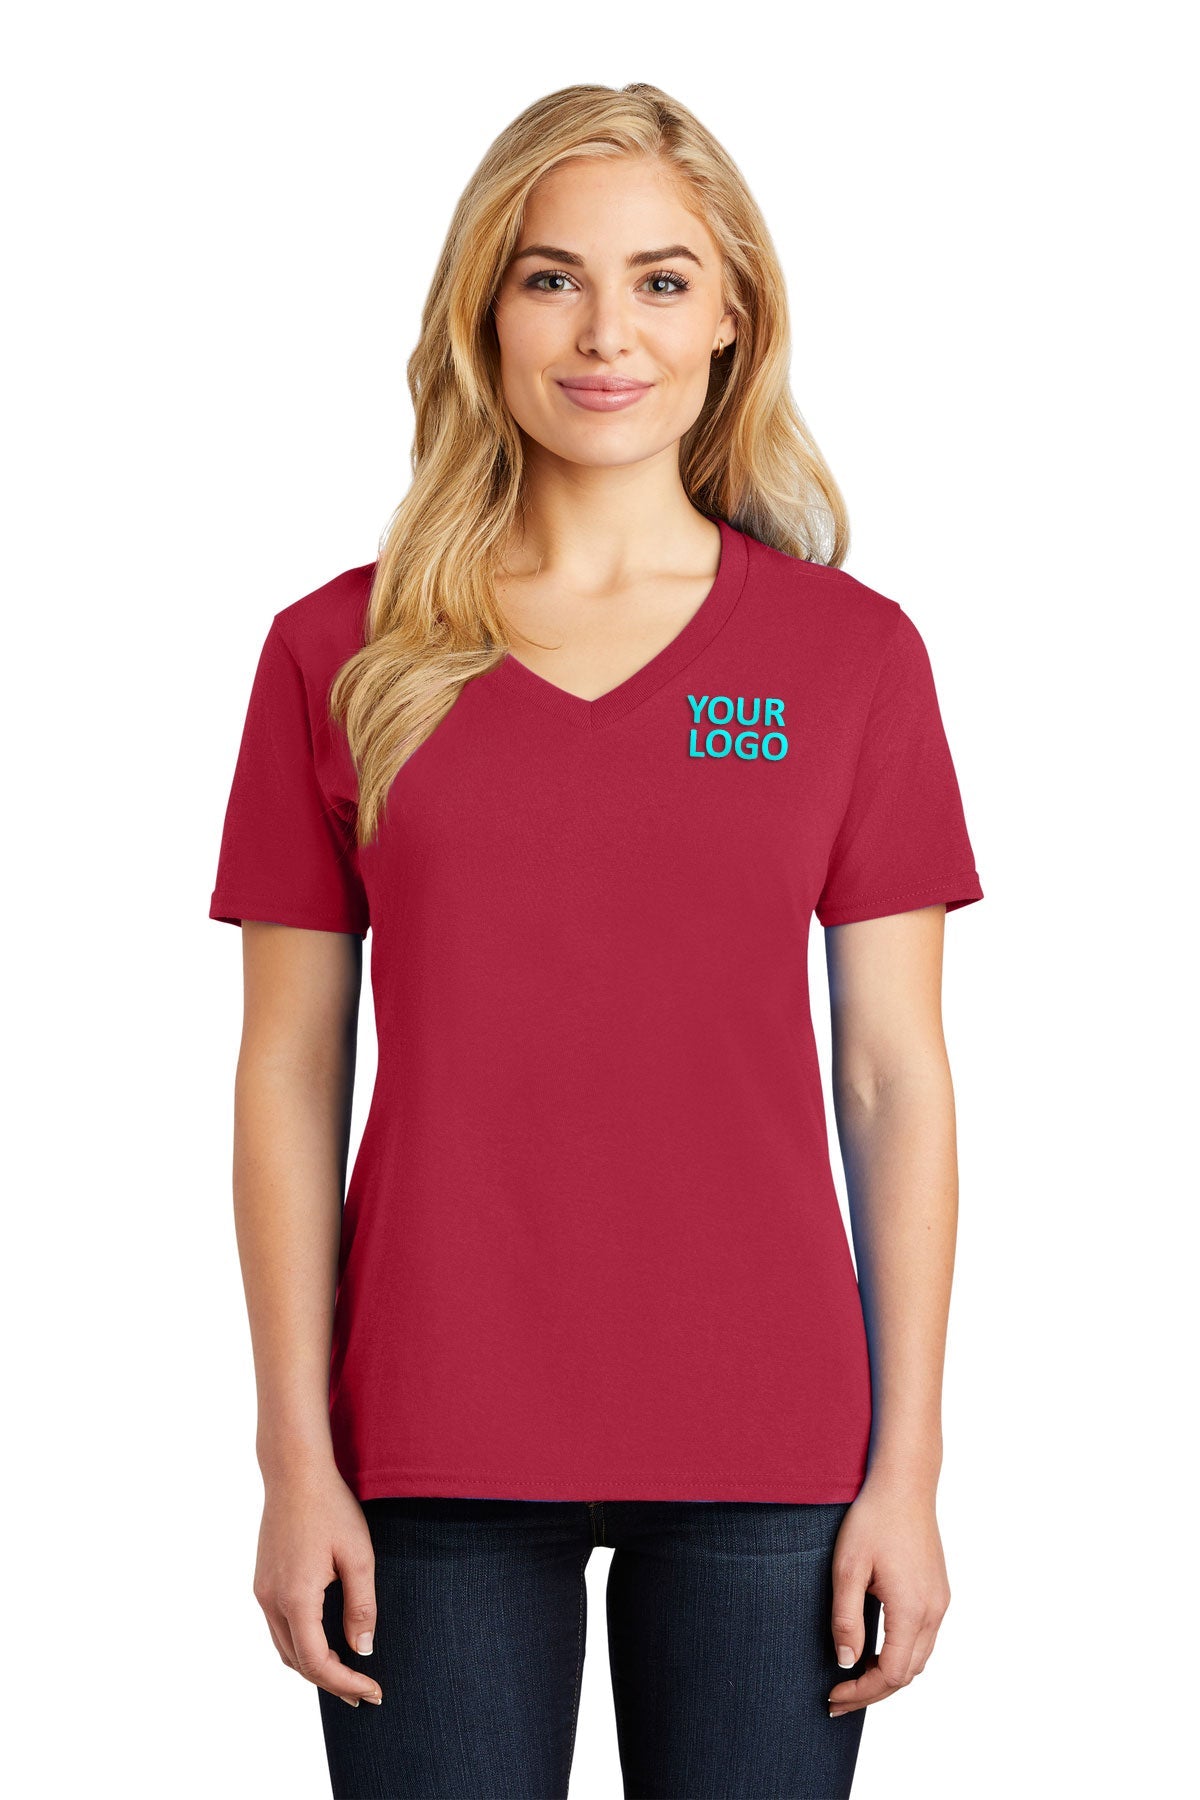 Port & Company Ladies Core Cotton Customized V-Neck Tee's, Red